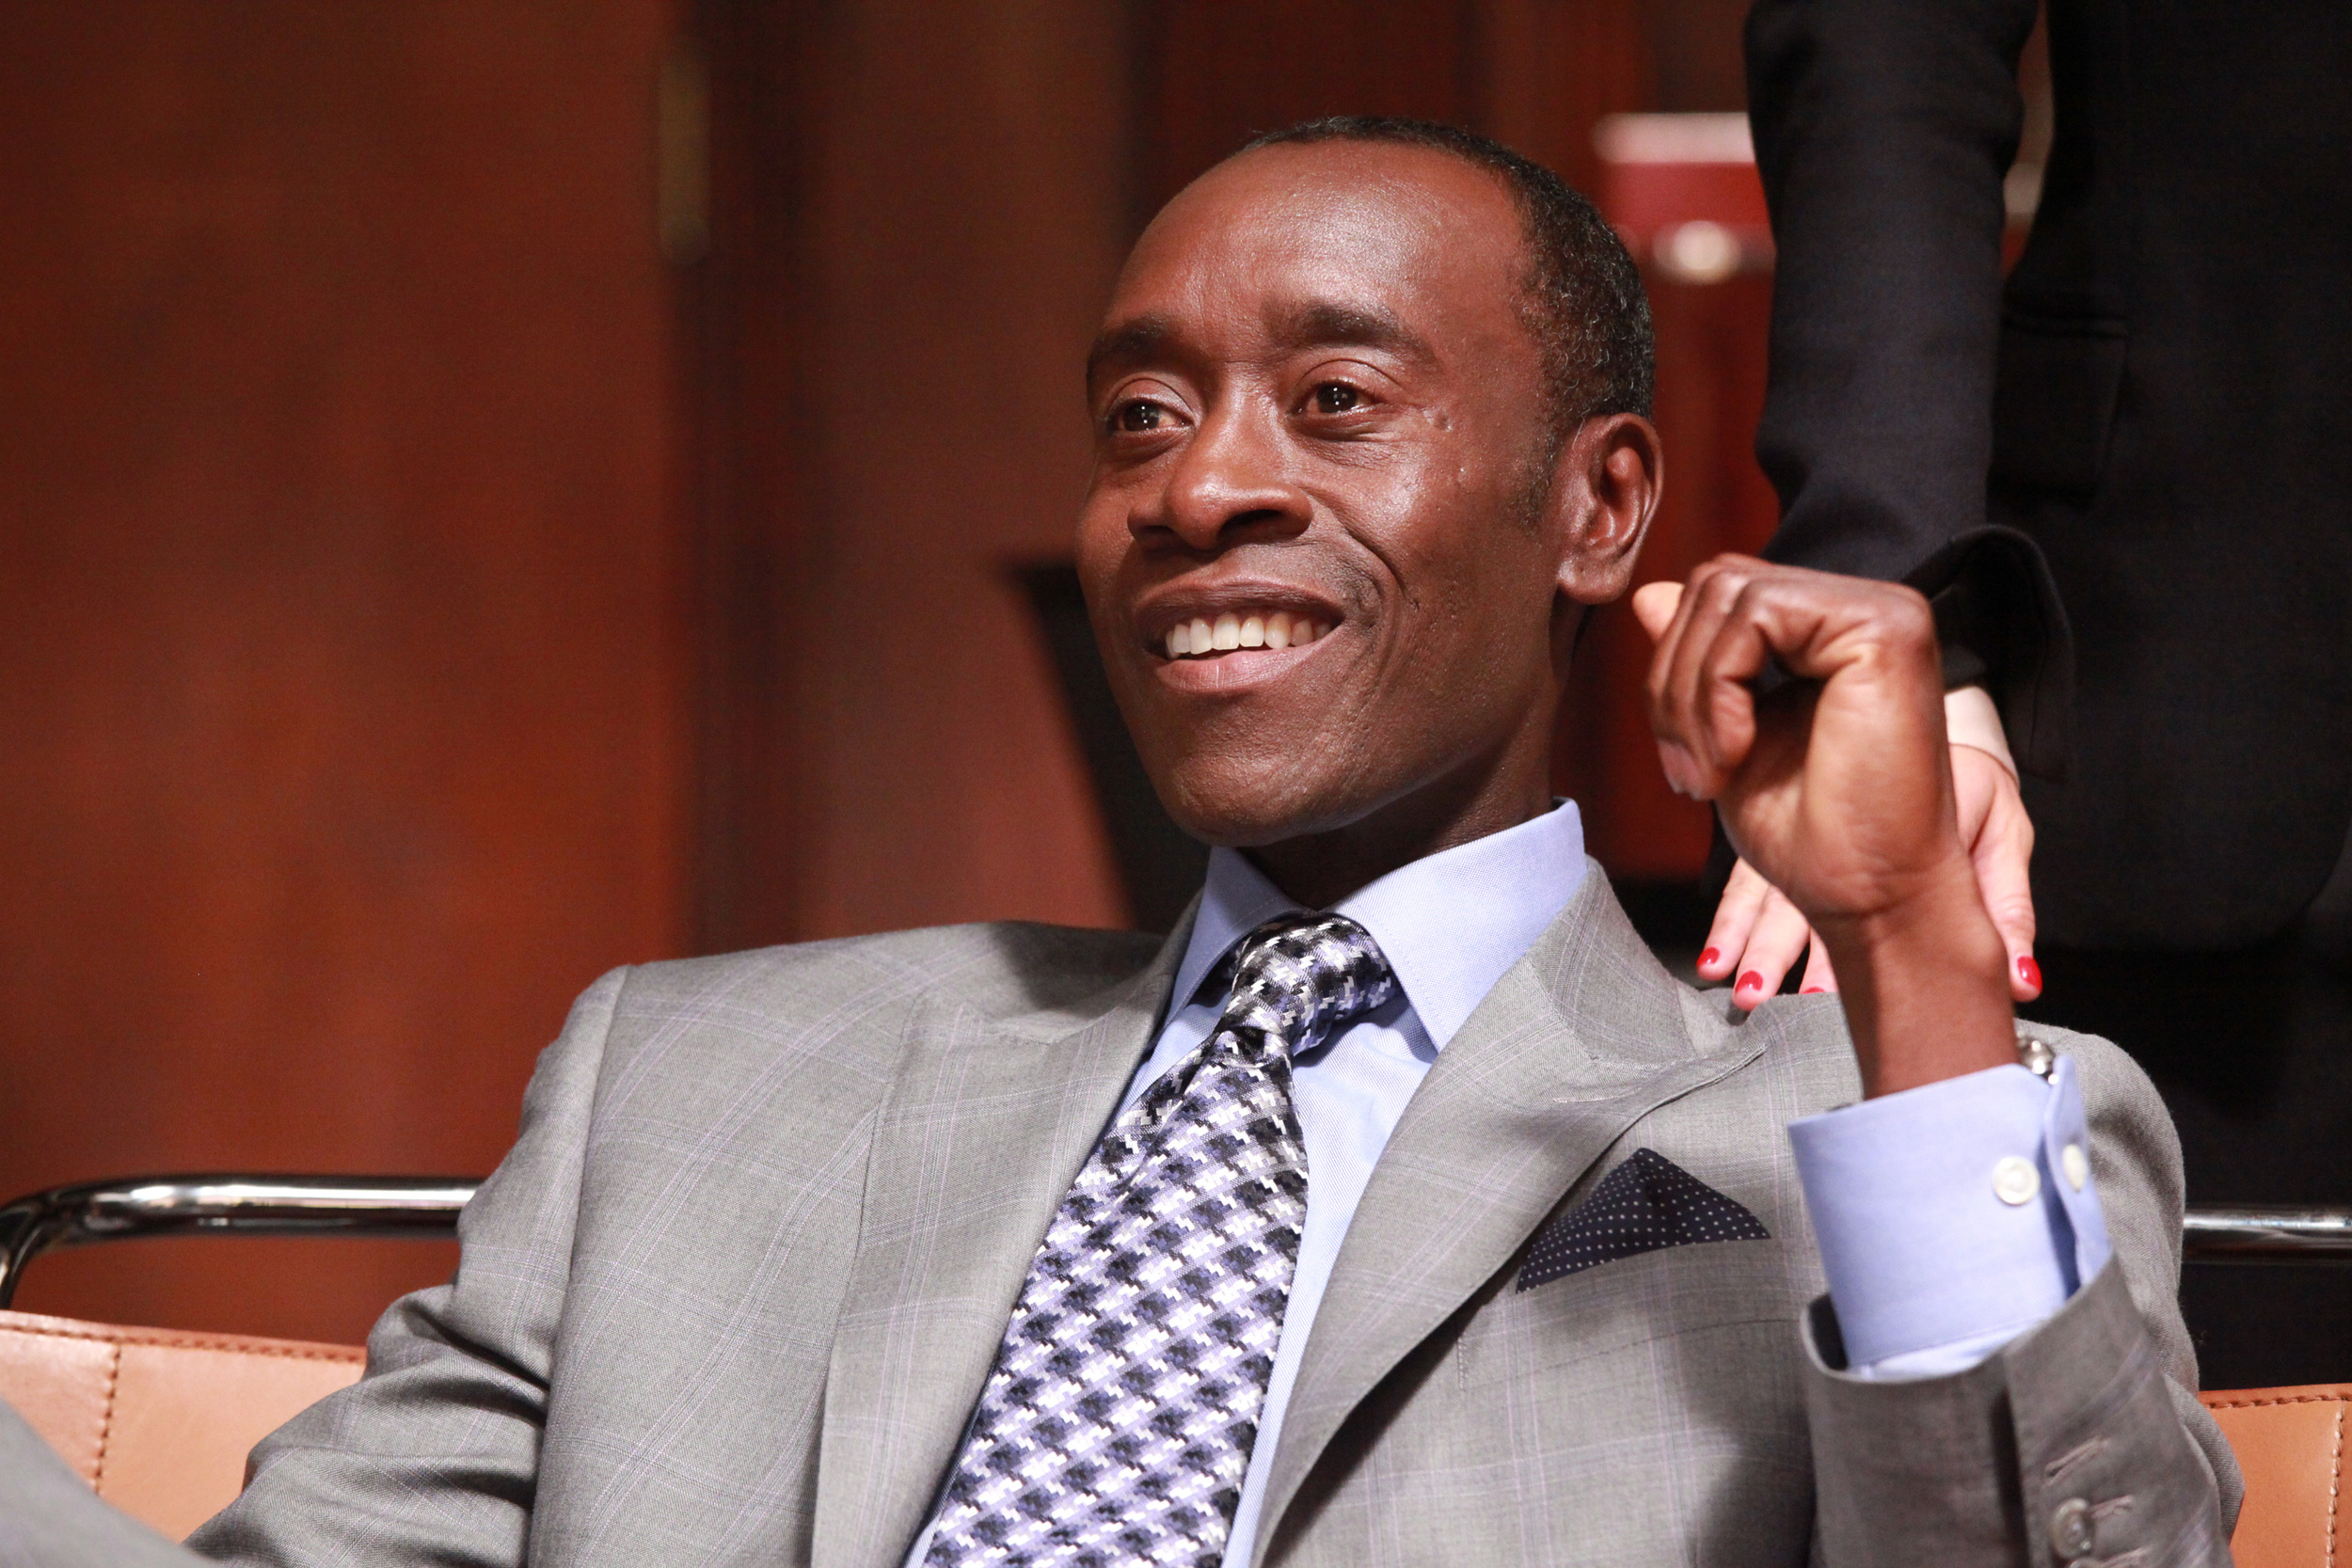 <p>He got an Oscar nomination for <em>Hotel Rwanda</em>, and he’s War Machine in the Marvel Cinematic Universe. Cheadle isn’t afraid of TV, though. Hey, he started on TV with <em>The Golden Palace</em>, a forgettable <em>Golden Girls</em> <a href="https://www.yardbarker.com/entertainment/articles/20_television_shows_with_multiple_spinoffs/s1__38135631" rel="noopener noreferrer">spinoff</a>. After moving to film, he returned to TV to star in two series: <em>House of Lies</em> and <em>Black Monday</em>.</p><p><a href='https://www.msn.com/en-us/community/channel/vid-cj9pqbr0vn9in2b6ddcd8sfgpfq6x6utp44fssrv6mc2gtybw0us'>Follow us on MSN to see more of our exclusive entertainment content.</a></p>